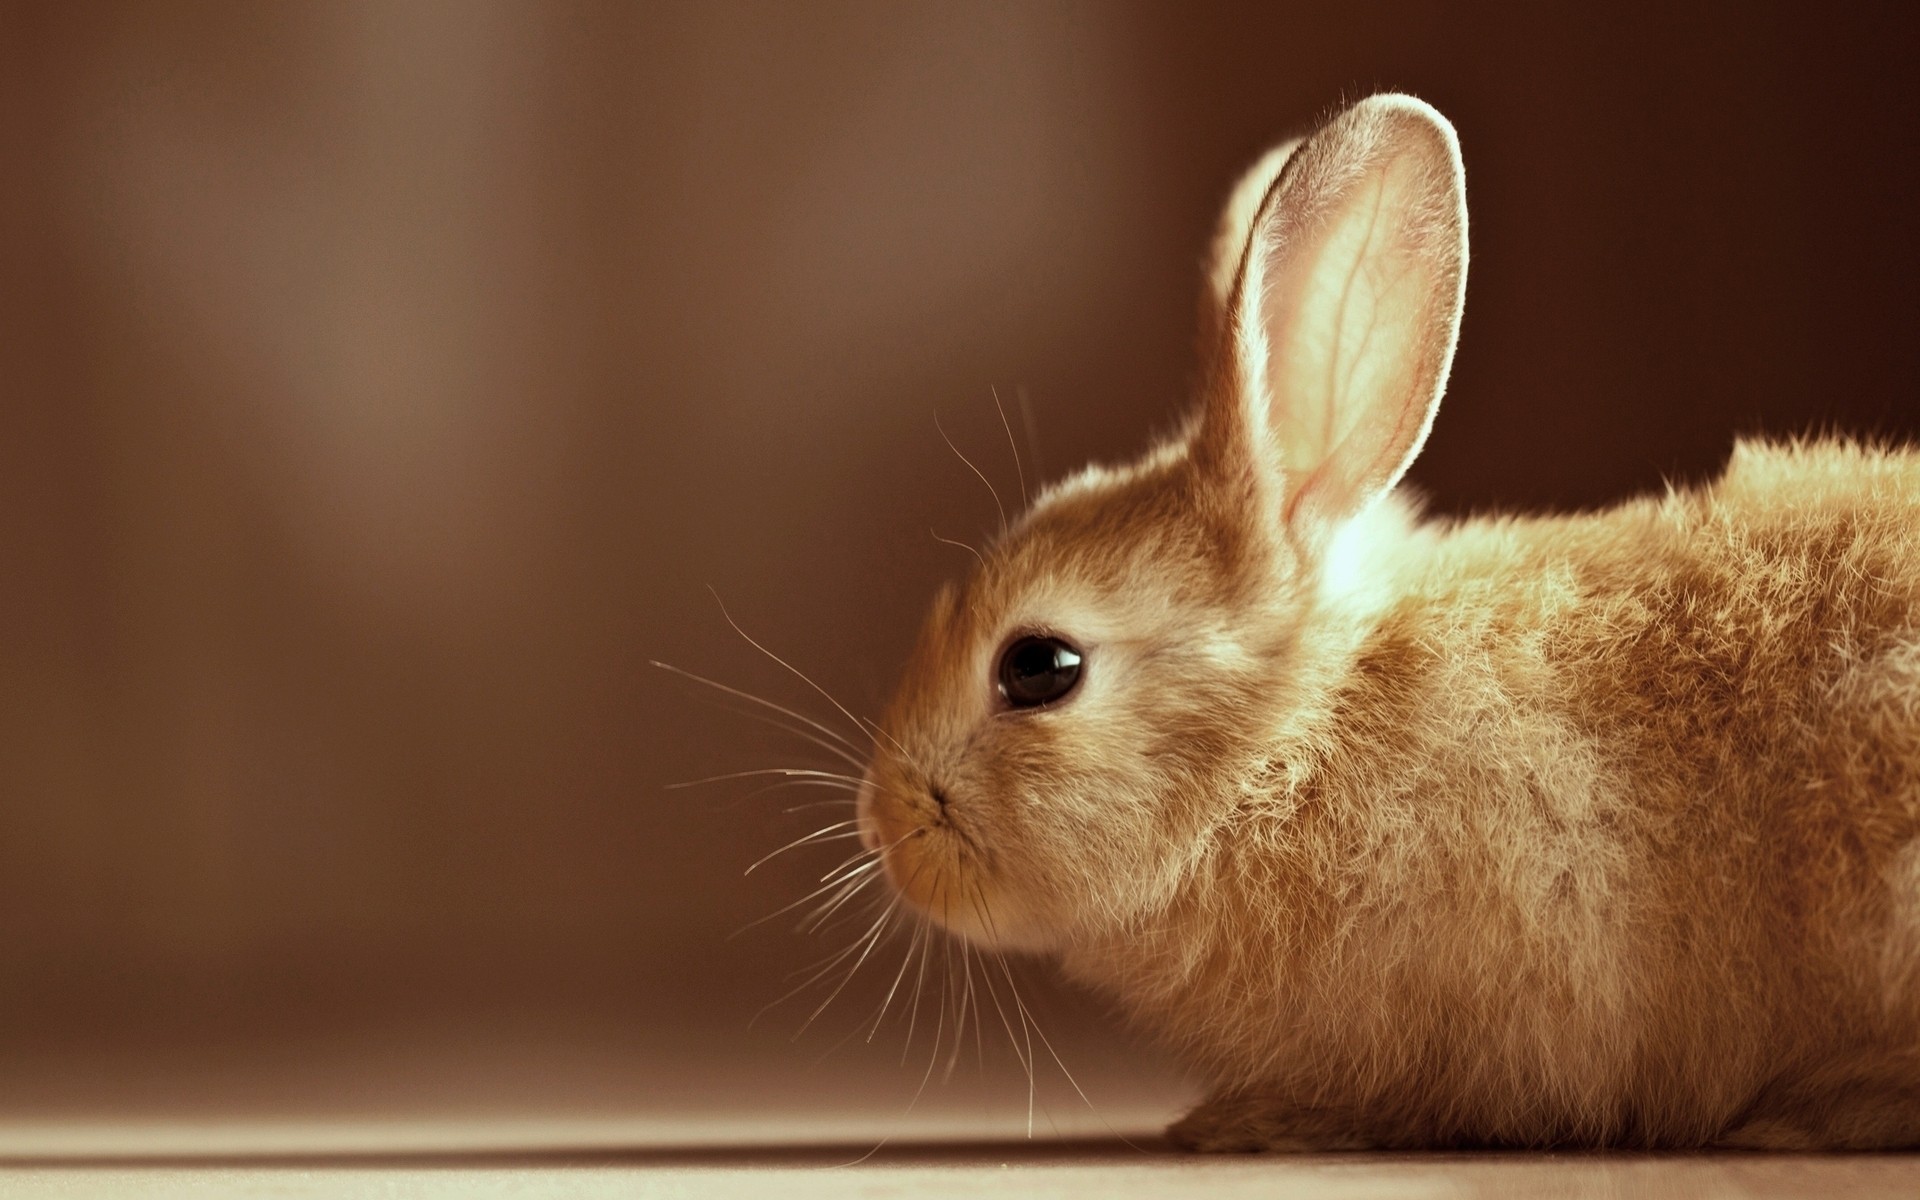 1920x1200 Rabbit Wallpapers Android Apps on Google Play 1920Ã1200 Pictures Of Rabbits  Wallpapers (55